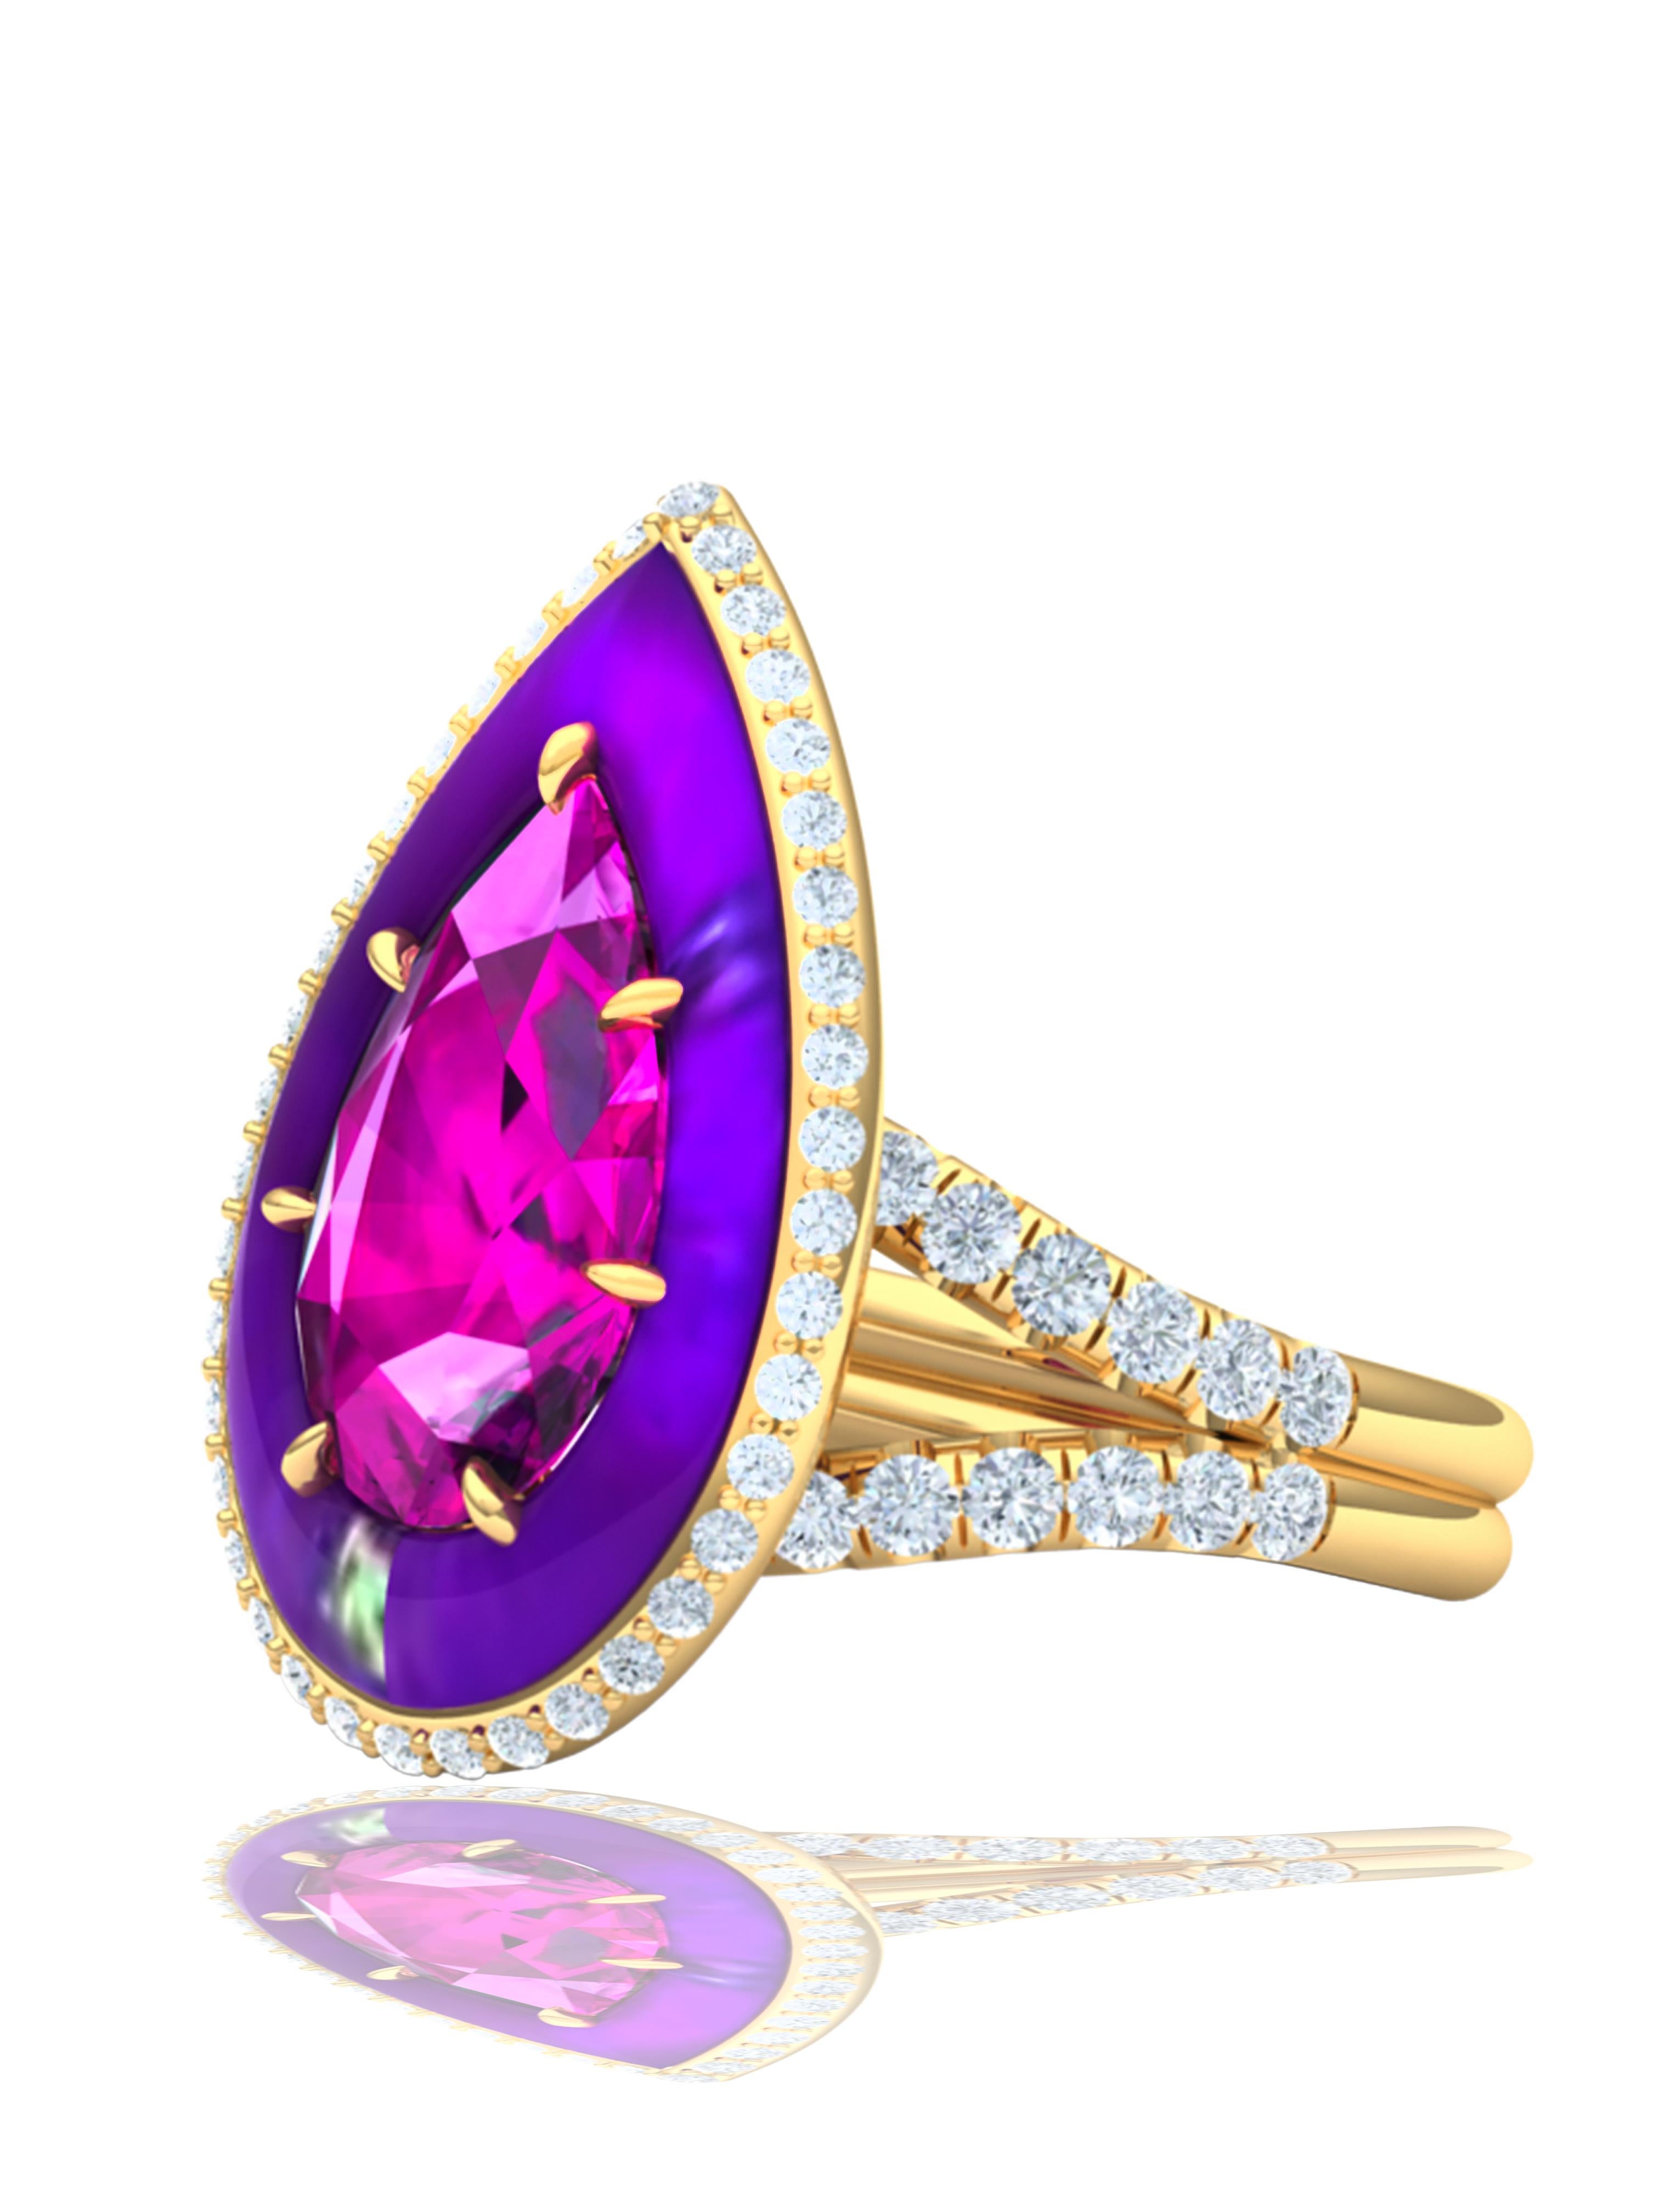 This stunning pear shape tourmaline has a electric magenta pink color with purple undertones.  The center stone weighs apprx. 5 carats and has SI clarity.  The center stone is surrounded by a custom cut piece of Sugilite that has a rich even purple